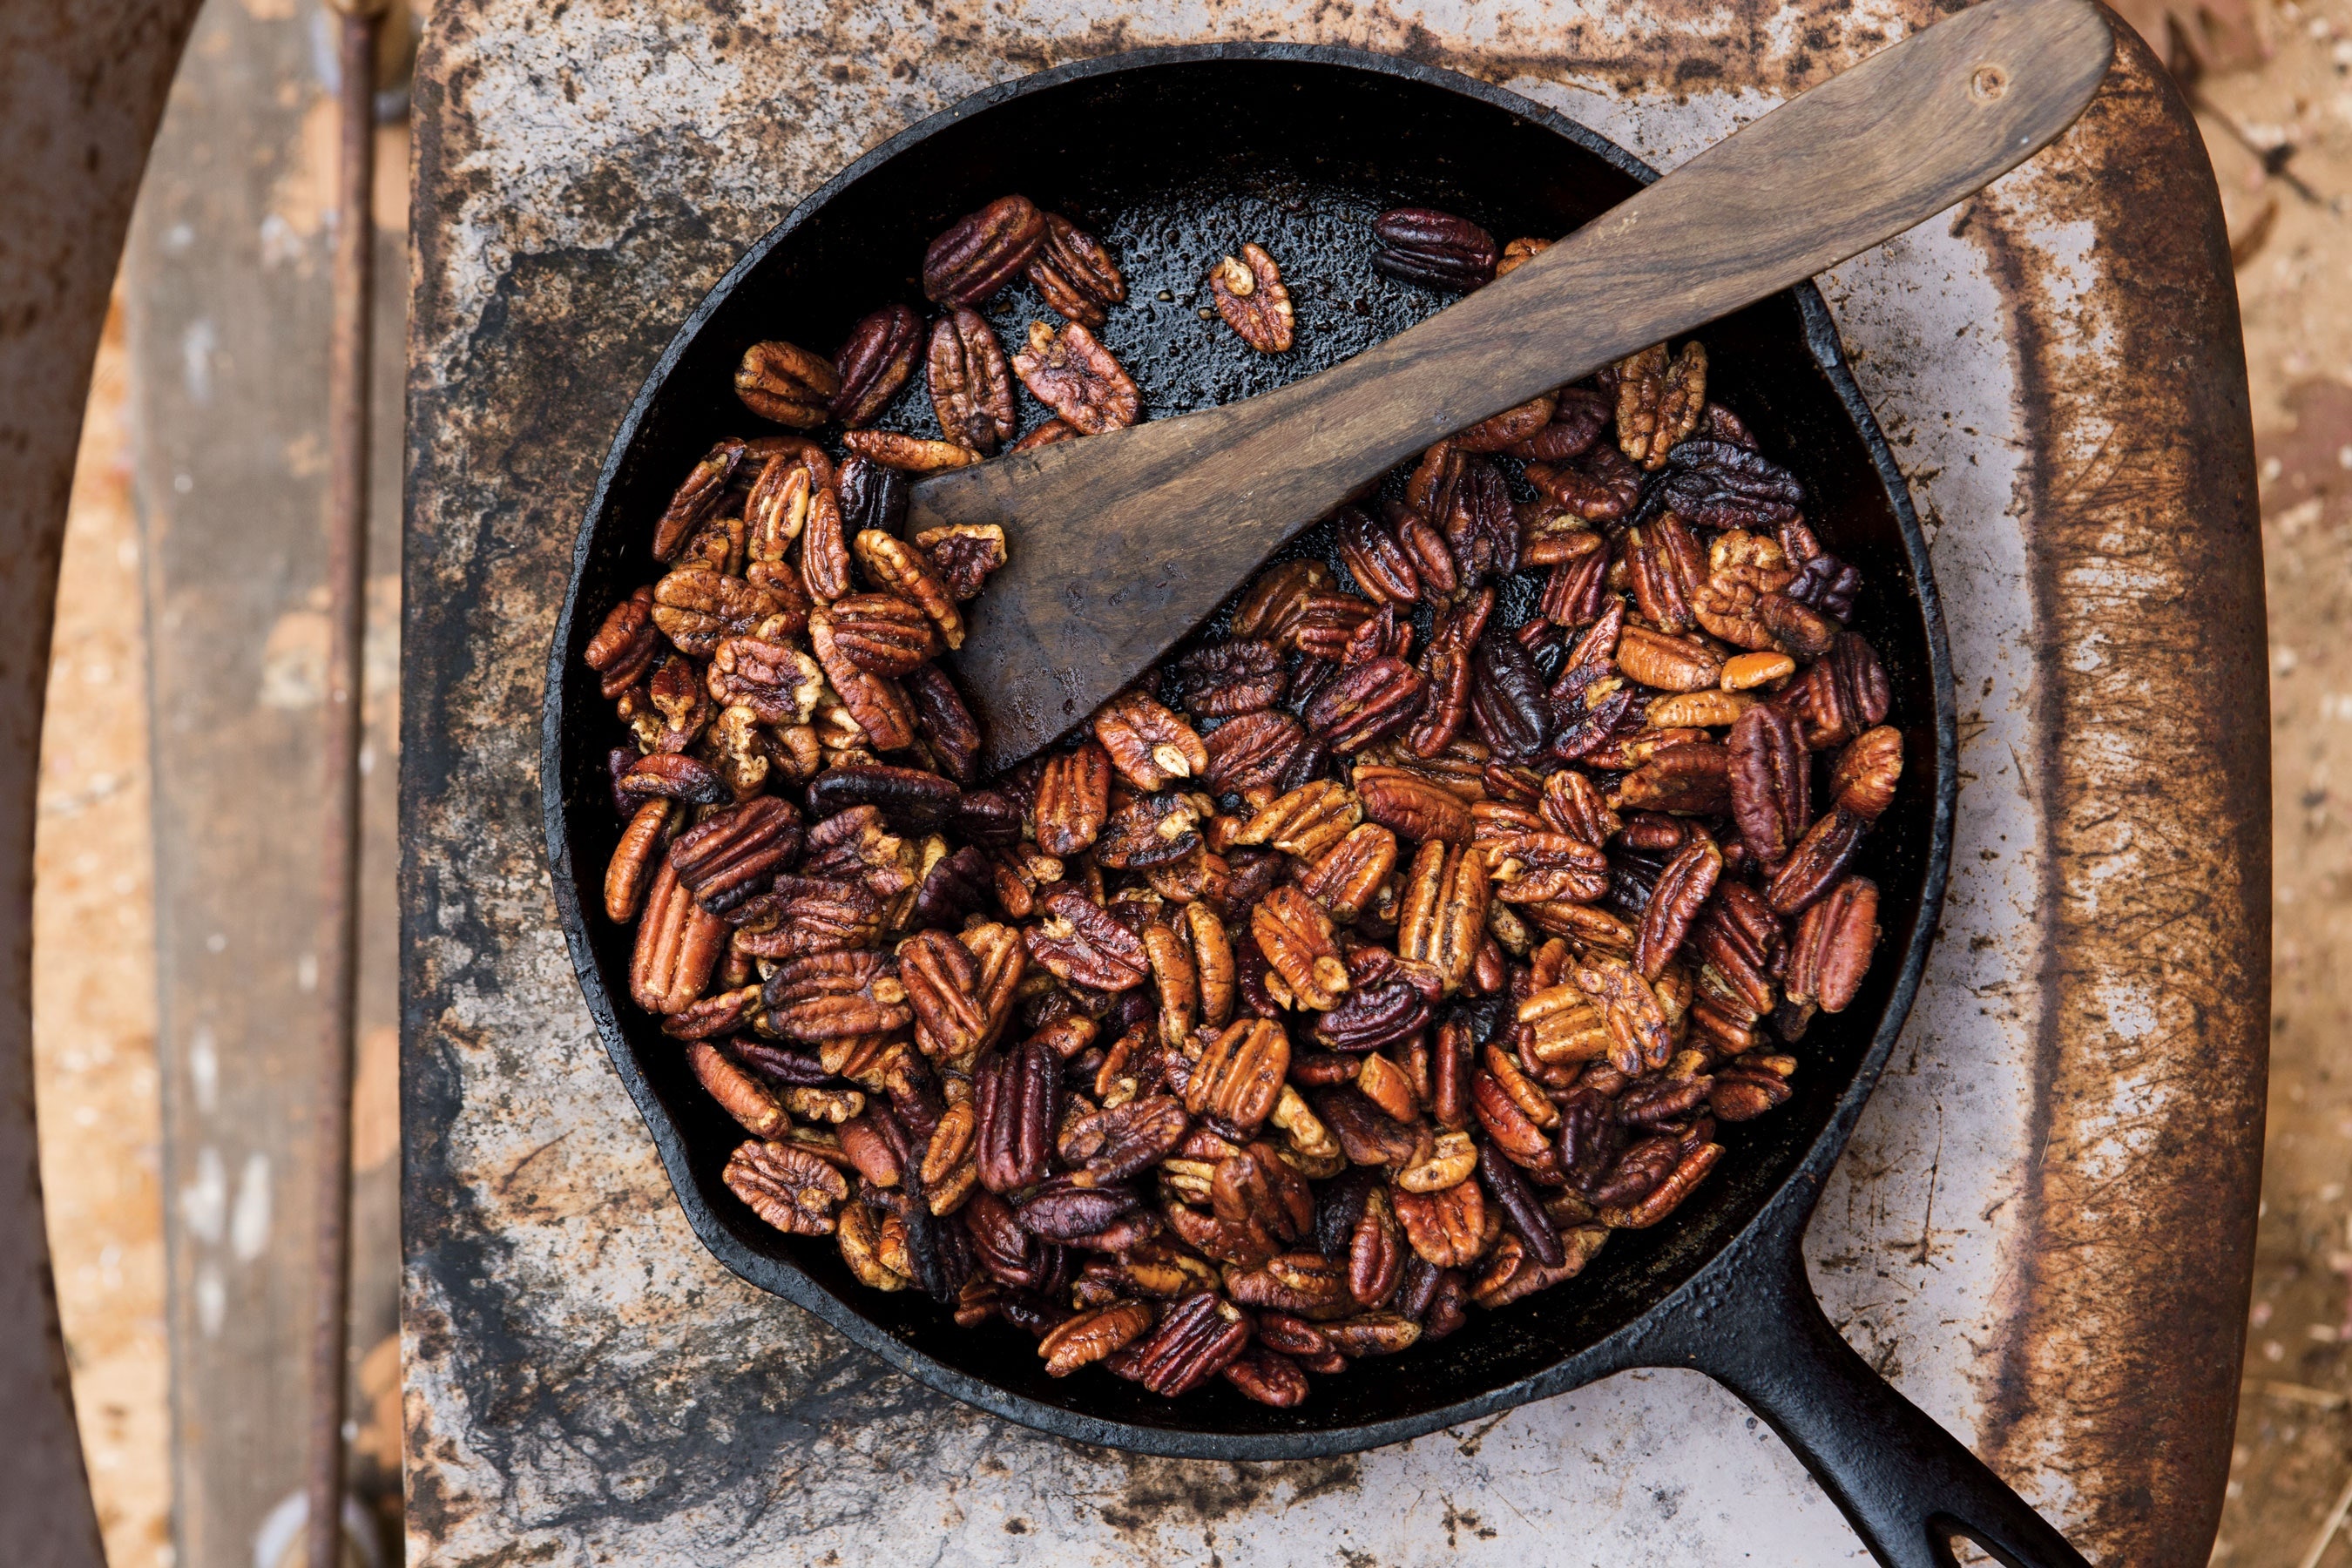 Pecans: The only major tree nut that grows naturally in North America. 2700x1800 HD Wallpaper.